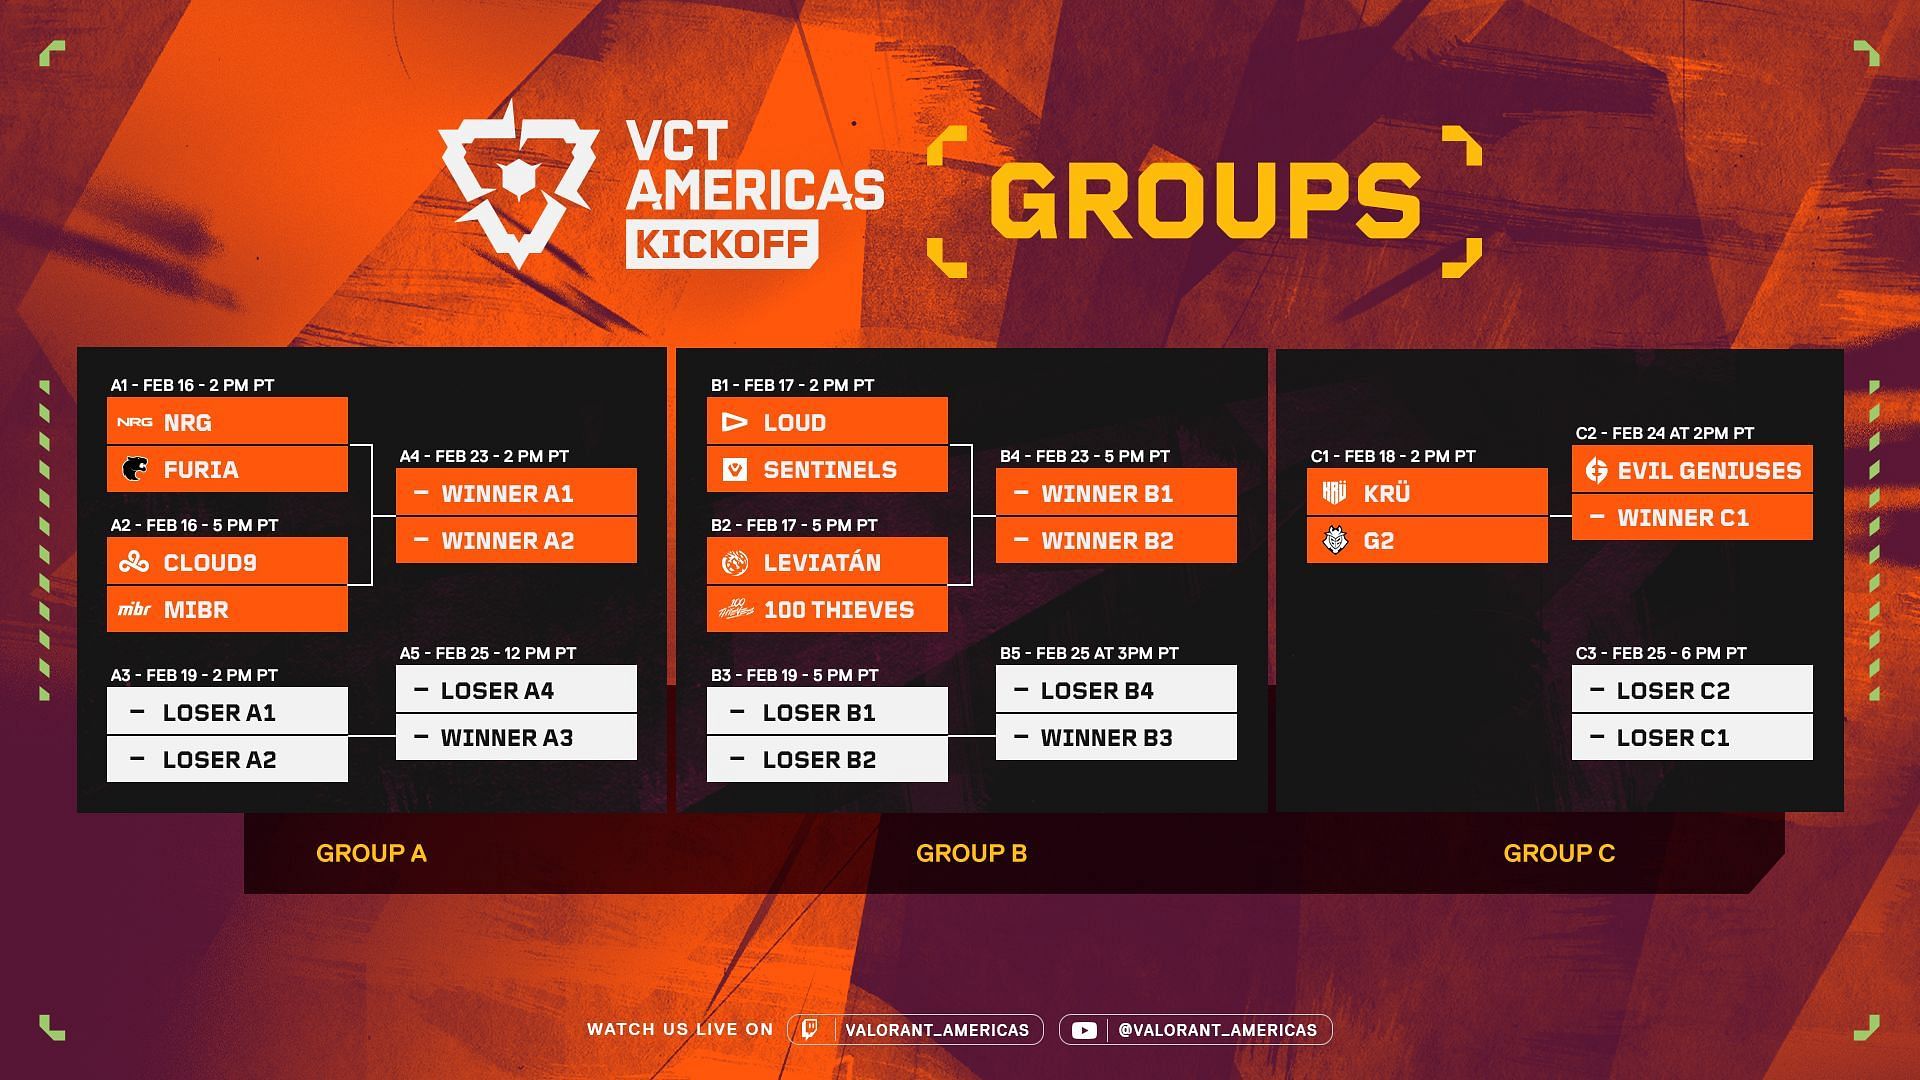 VCT Americas Kickoff schedule (Image via Riot Games)